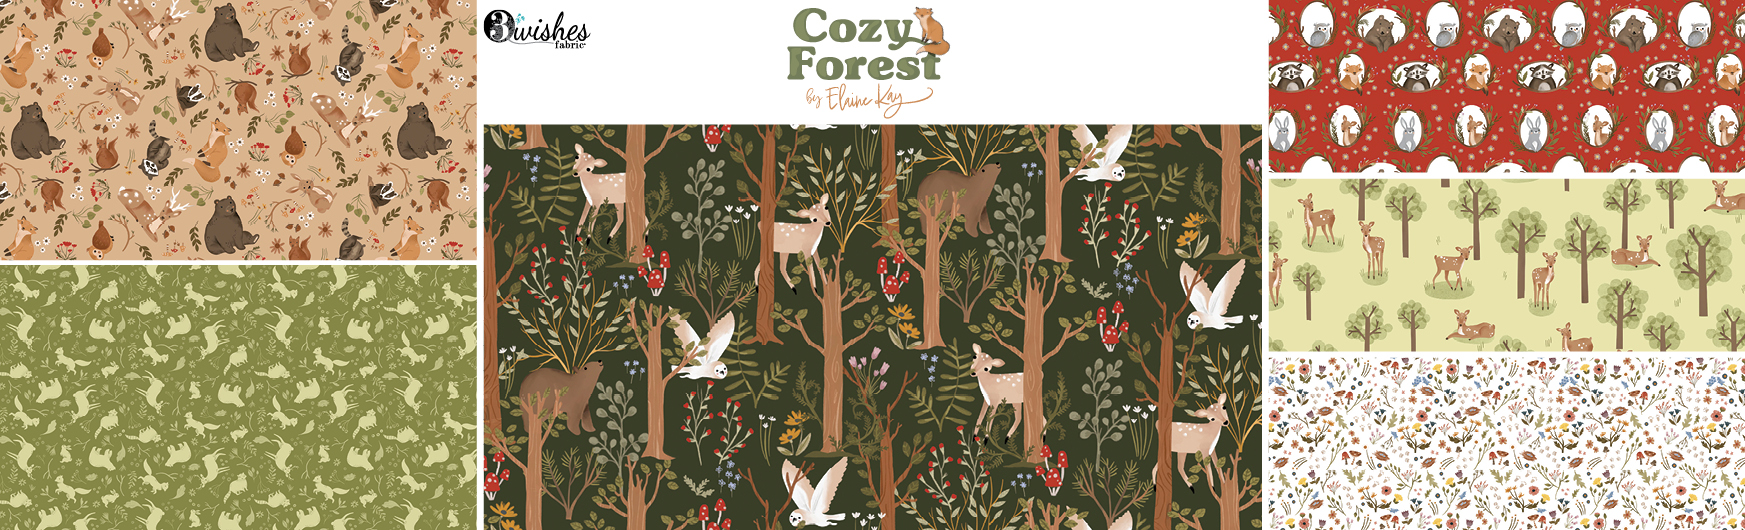 Cozy Forest